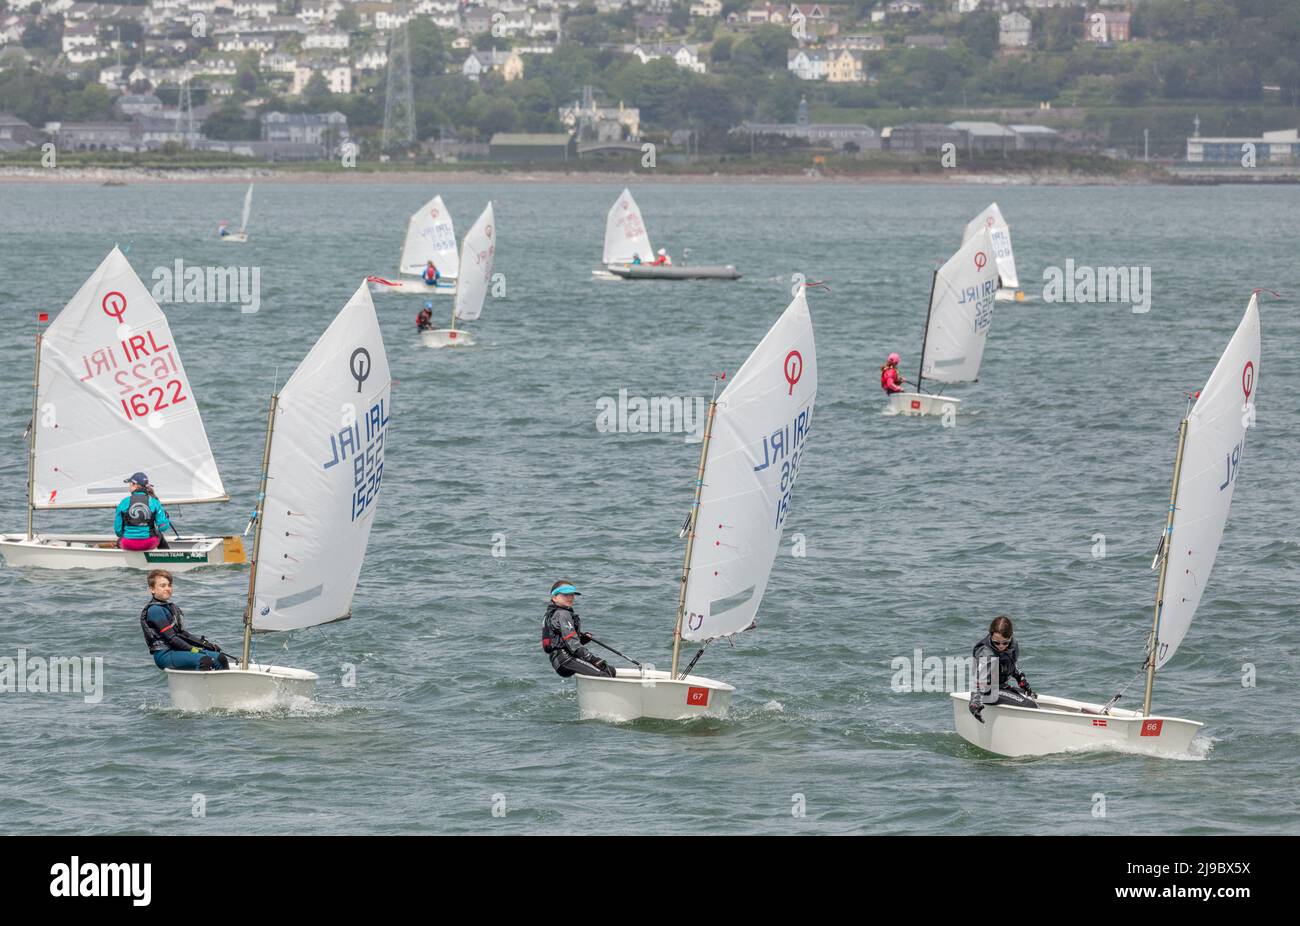 Crosshaven, Cork, Ireland. 22nd May, 2022. Some of the competitors taking part in the IODAI Optimist Munster Championship that was held in Crosshaven, Co. Cork, Ireland over the weekend. - Credit; David Creedon / Alamy Live News Stock Photo